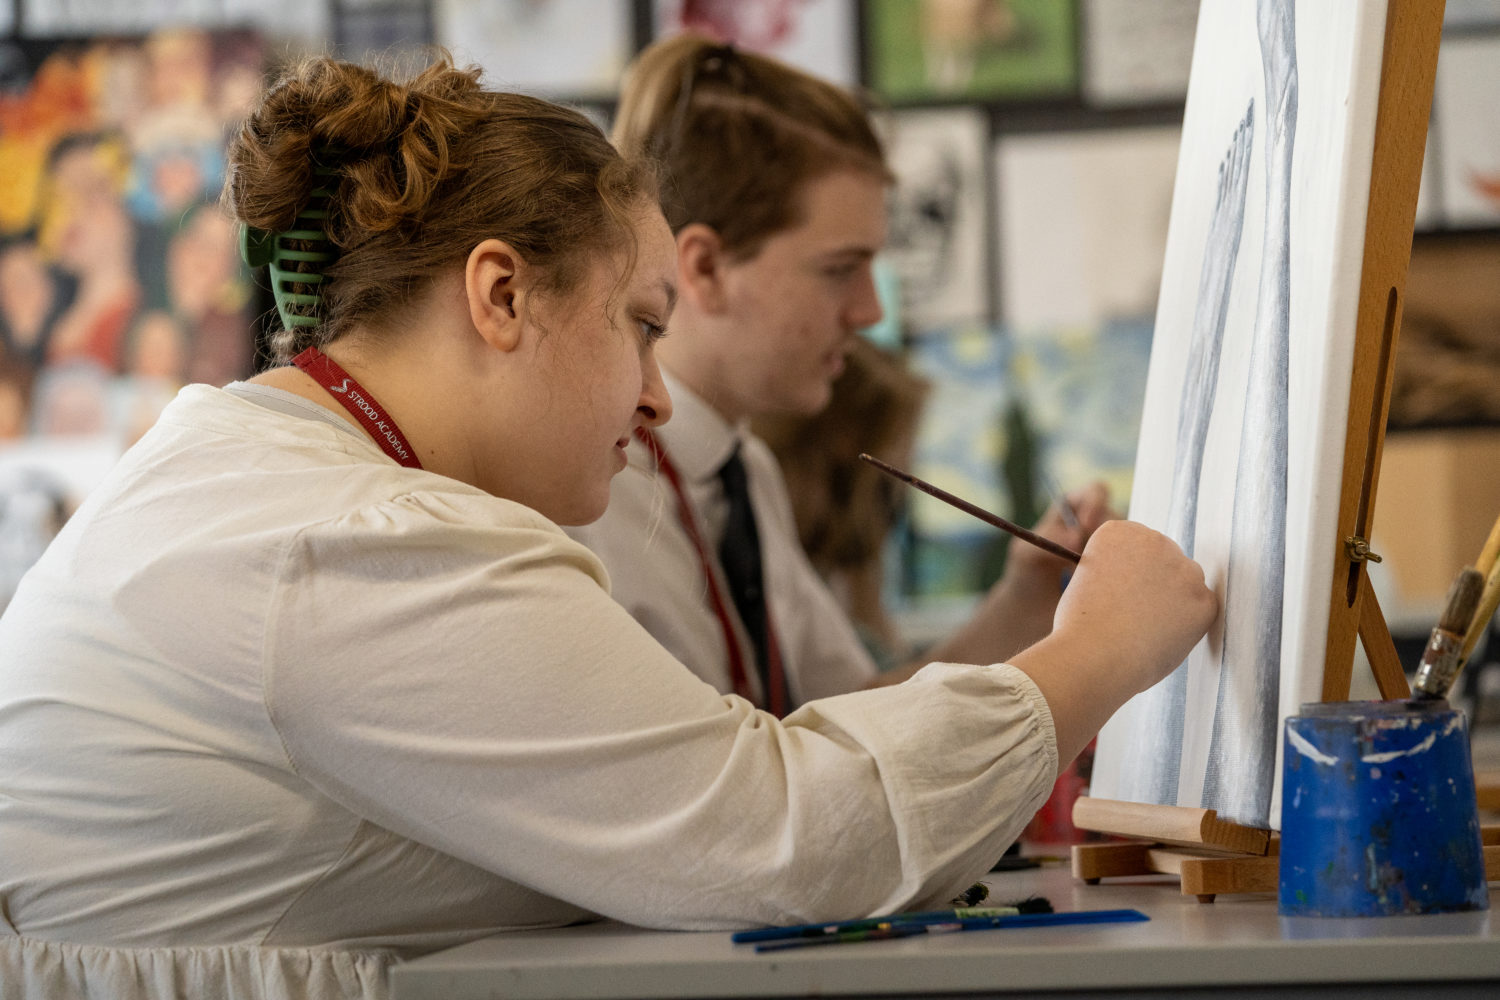 A female student painting on an easel with a male student in the background also painting